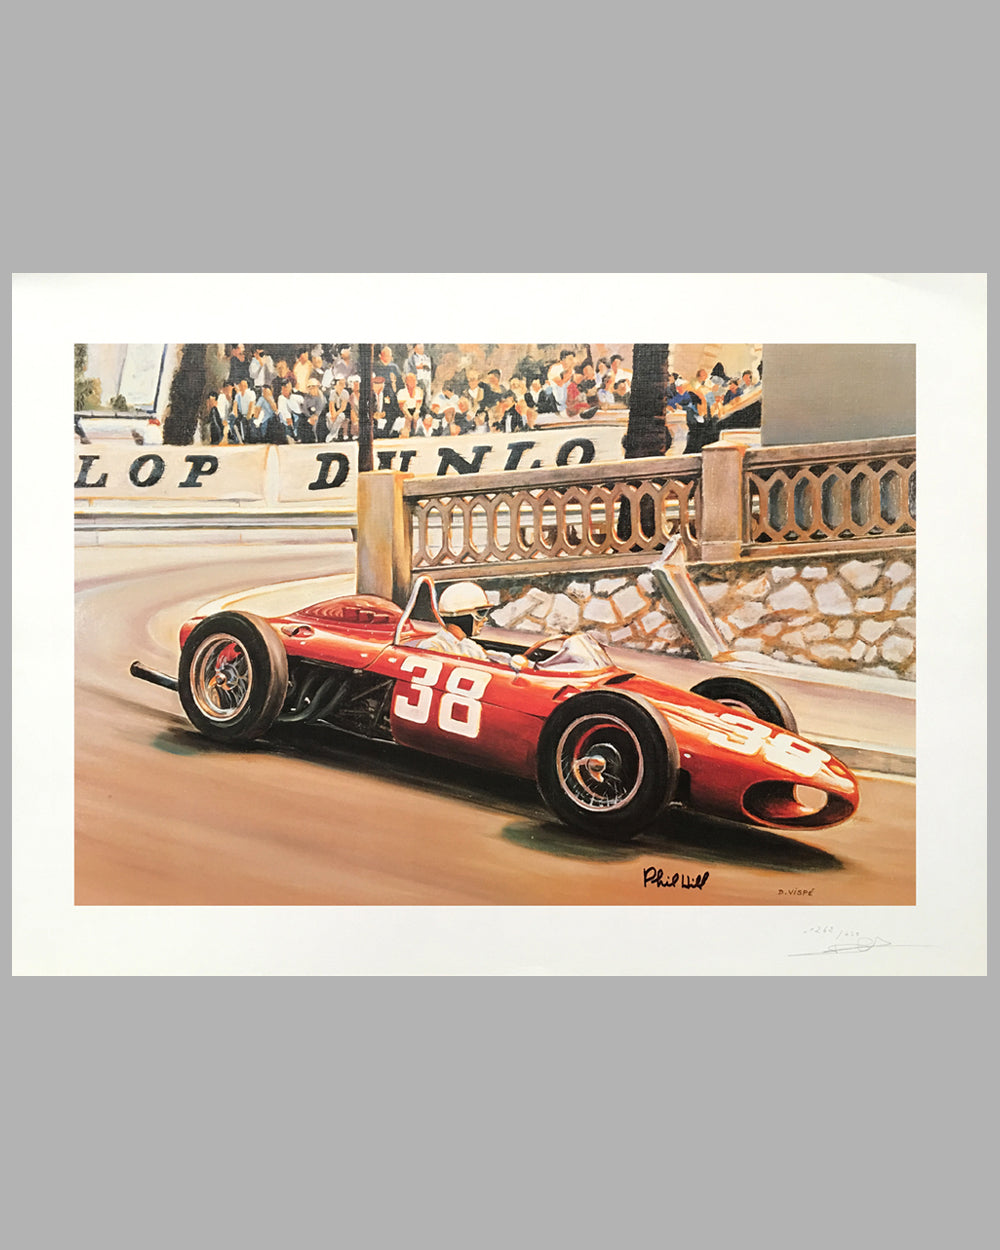 Phil Hill’s Ferrari print at the Grand Prix of Monaco by Denis Vispe, Autographed by Phil Hill